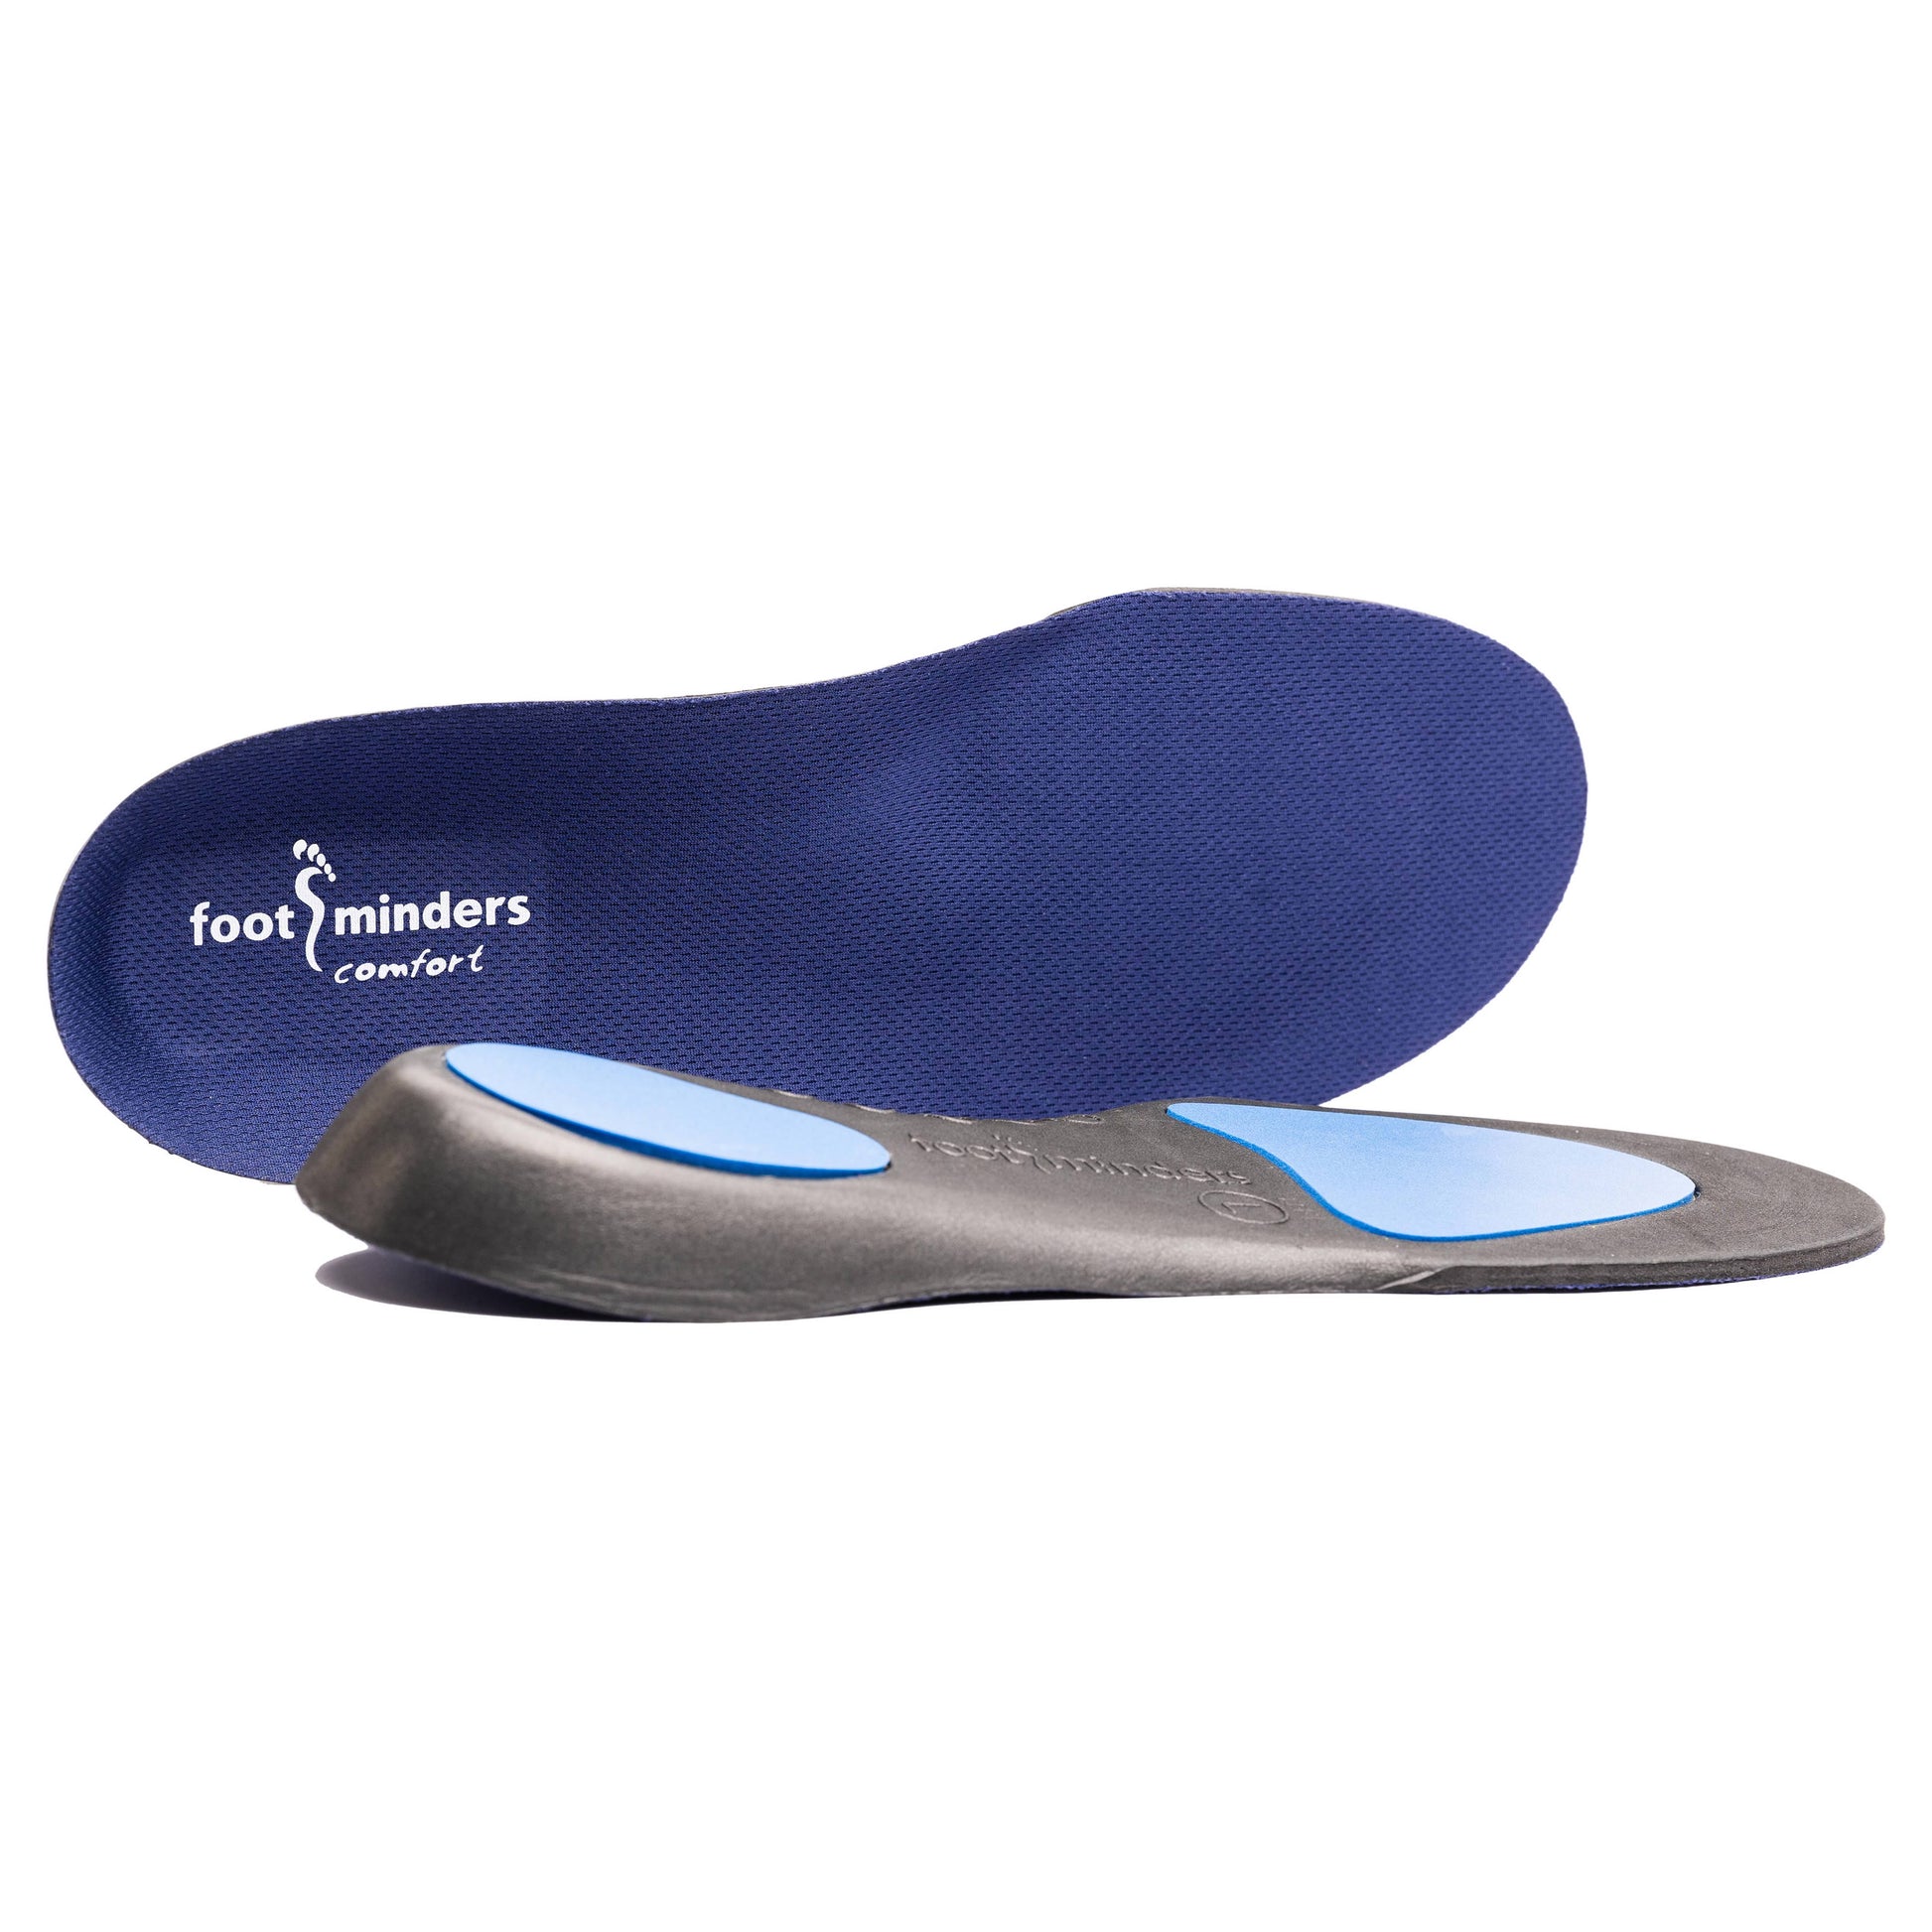 Footminders COMFORT - Orthotic arch support insoles for sports shoes and work boots - Footminders Inc.